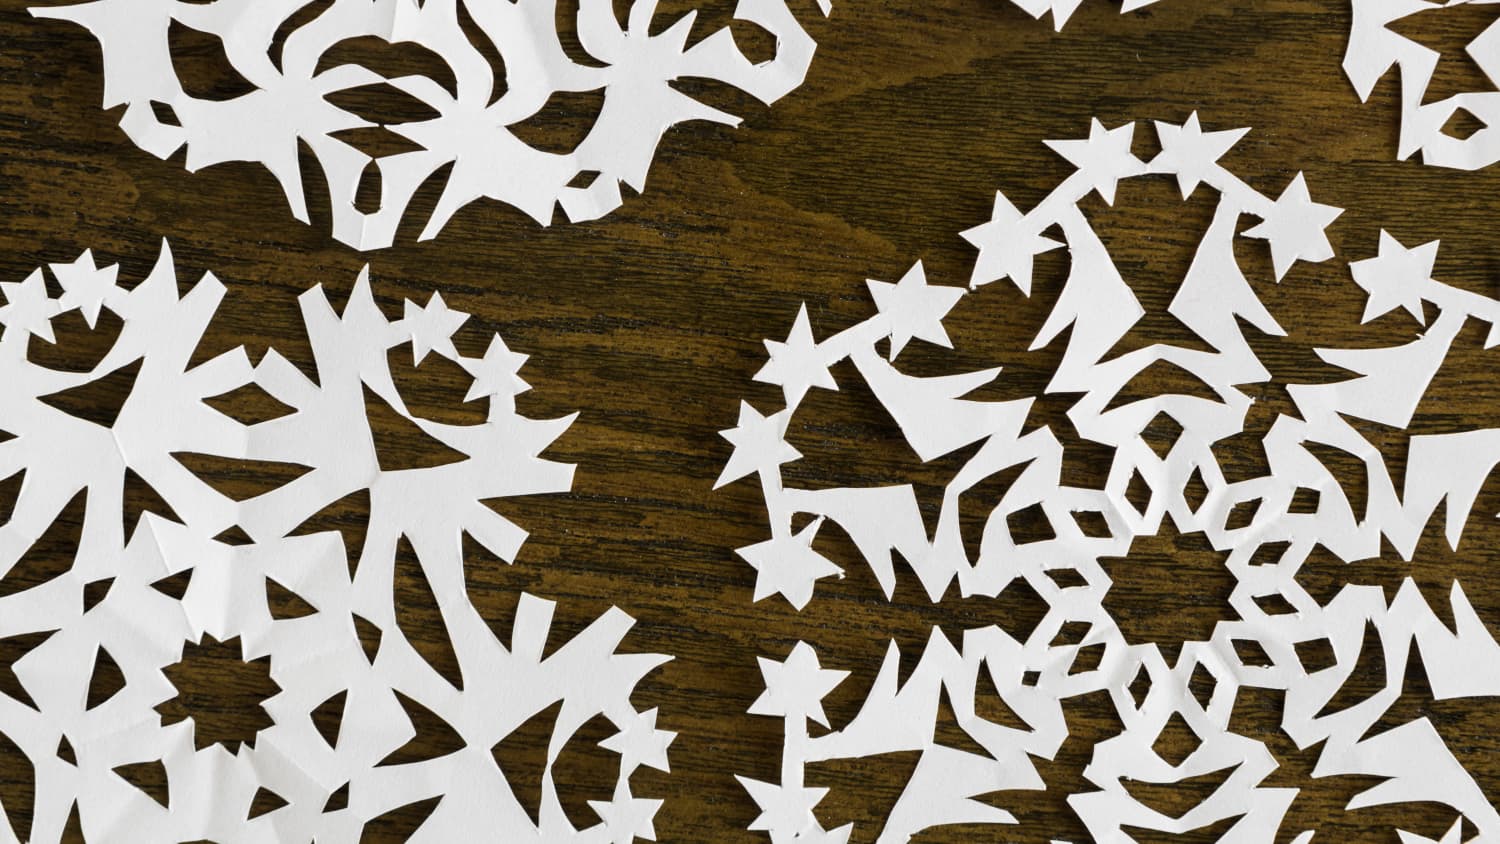 Paper Snowflake Patterns and Next Level Projects